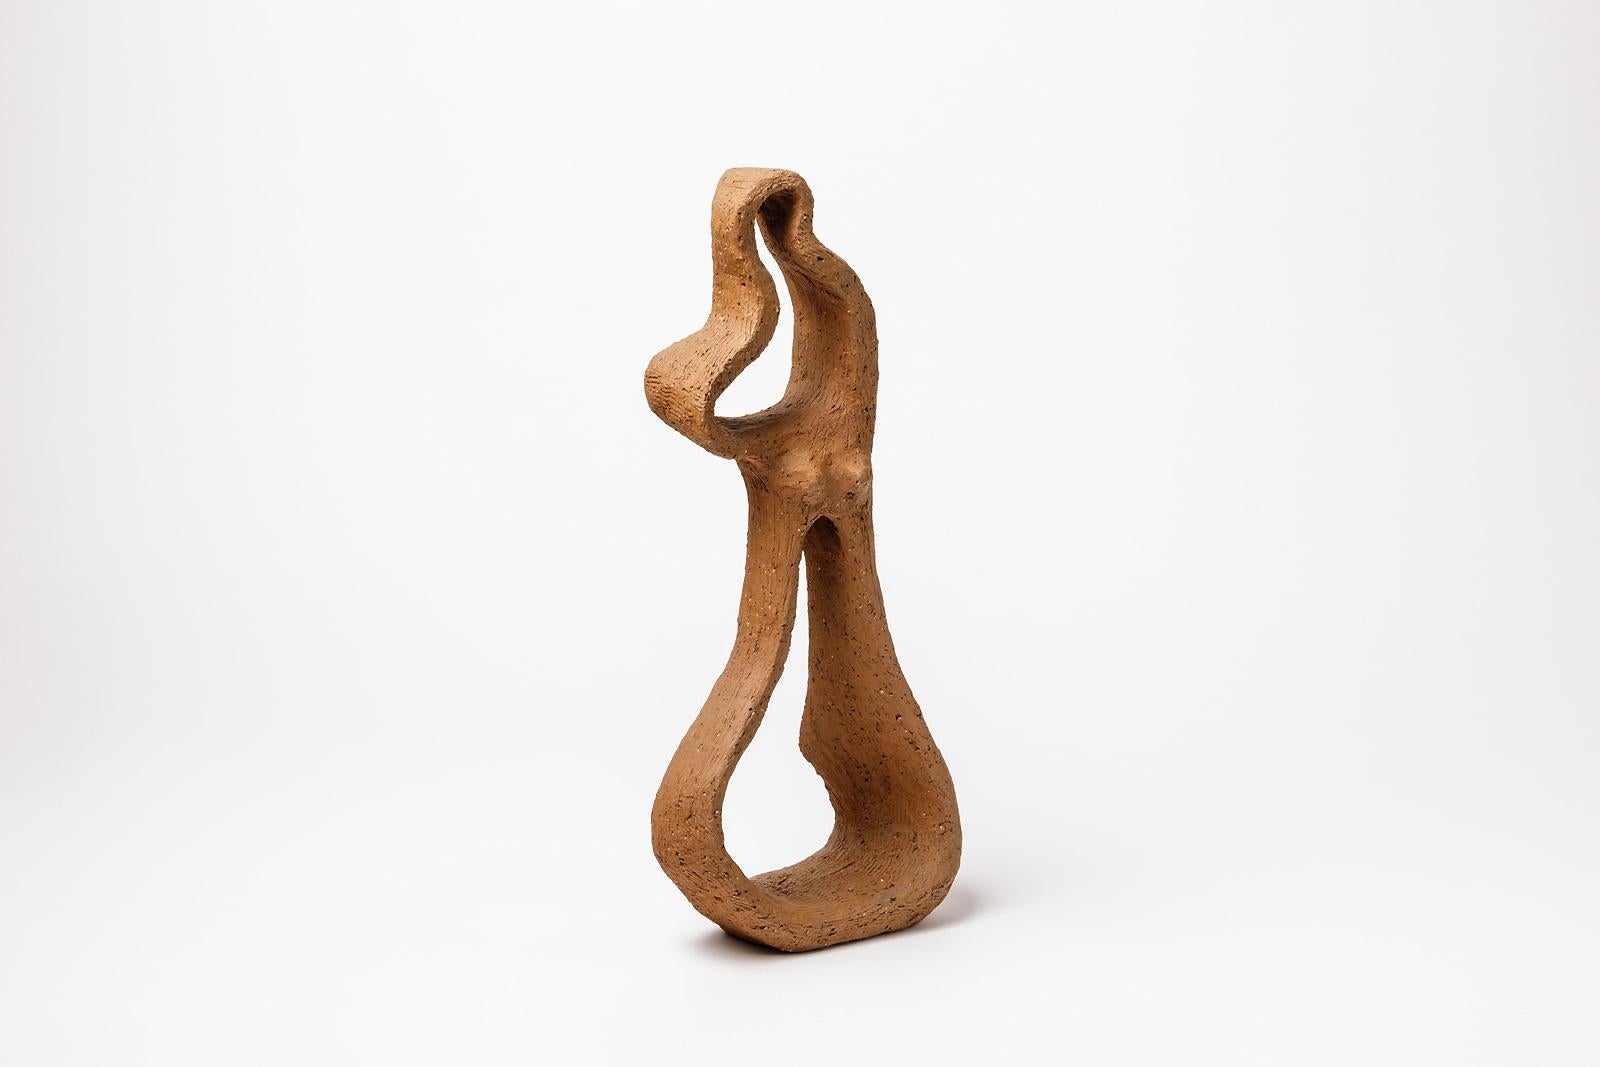 Patrick Jaillot,

circa 1960

Elegant abstract ceramic freeform by the French artist.

Wall or table sculpture in brown ceramic glaze color.

Measures: Height 39cm, large 18cm, depth 7cm

Original perfect condition.